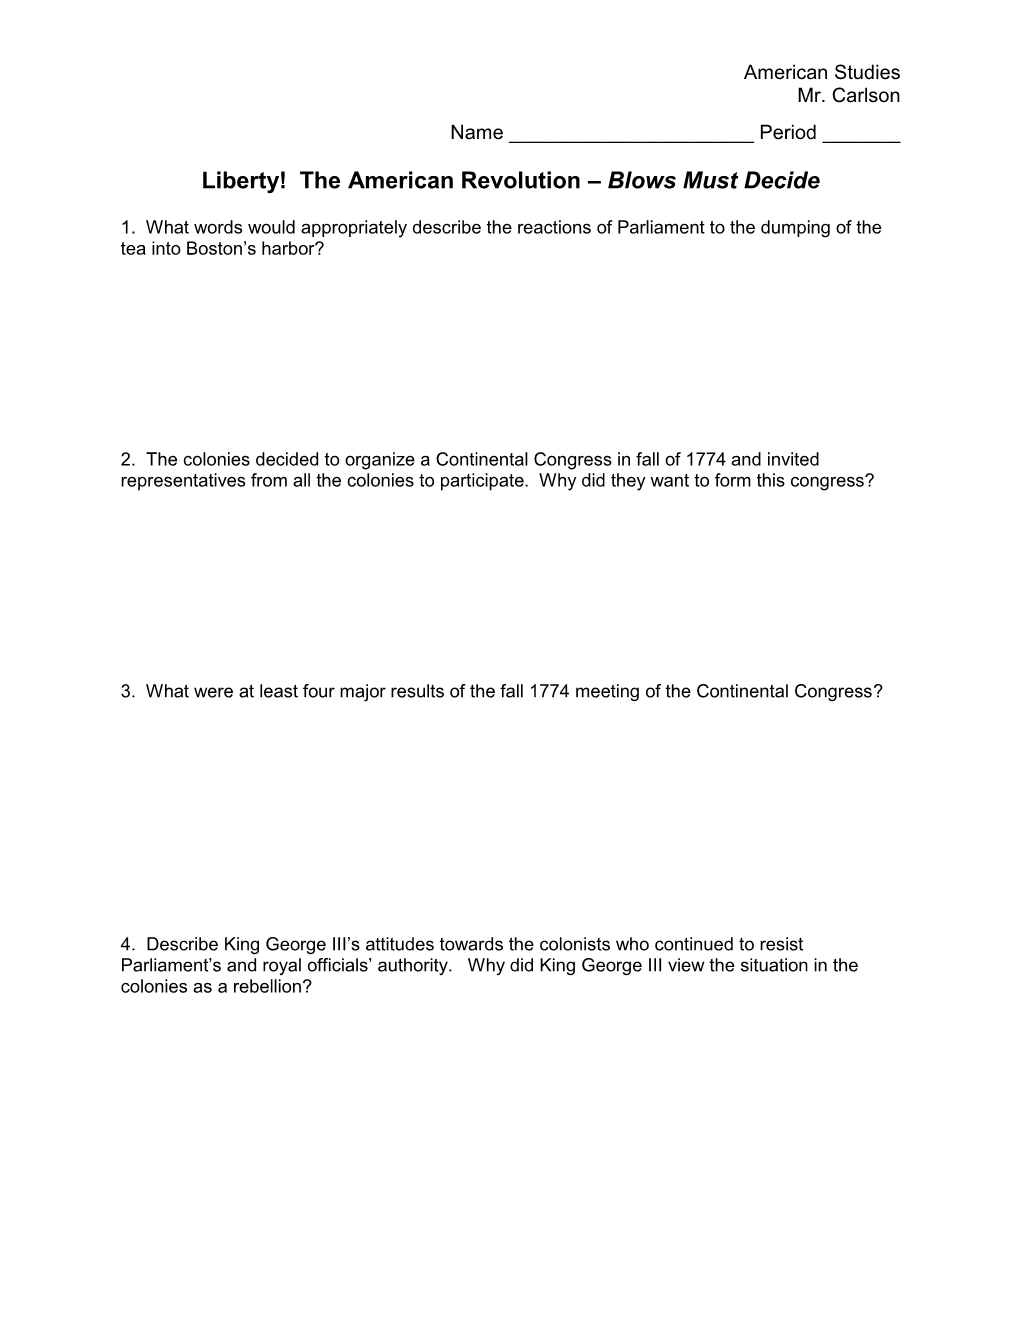 Liberty! the American Revolution – Blows Must Decide